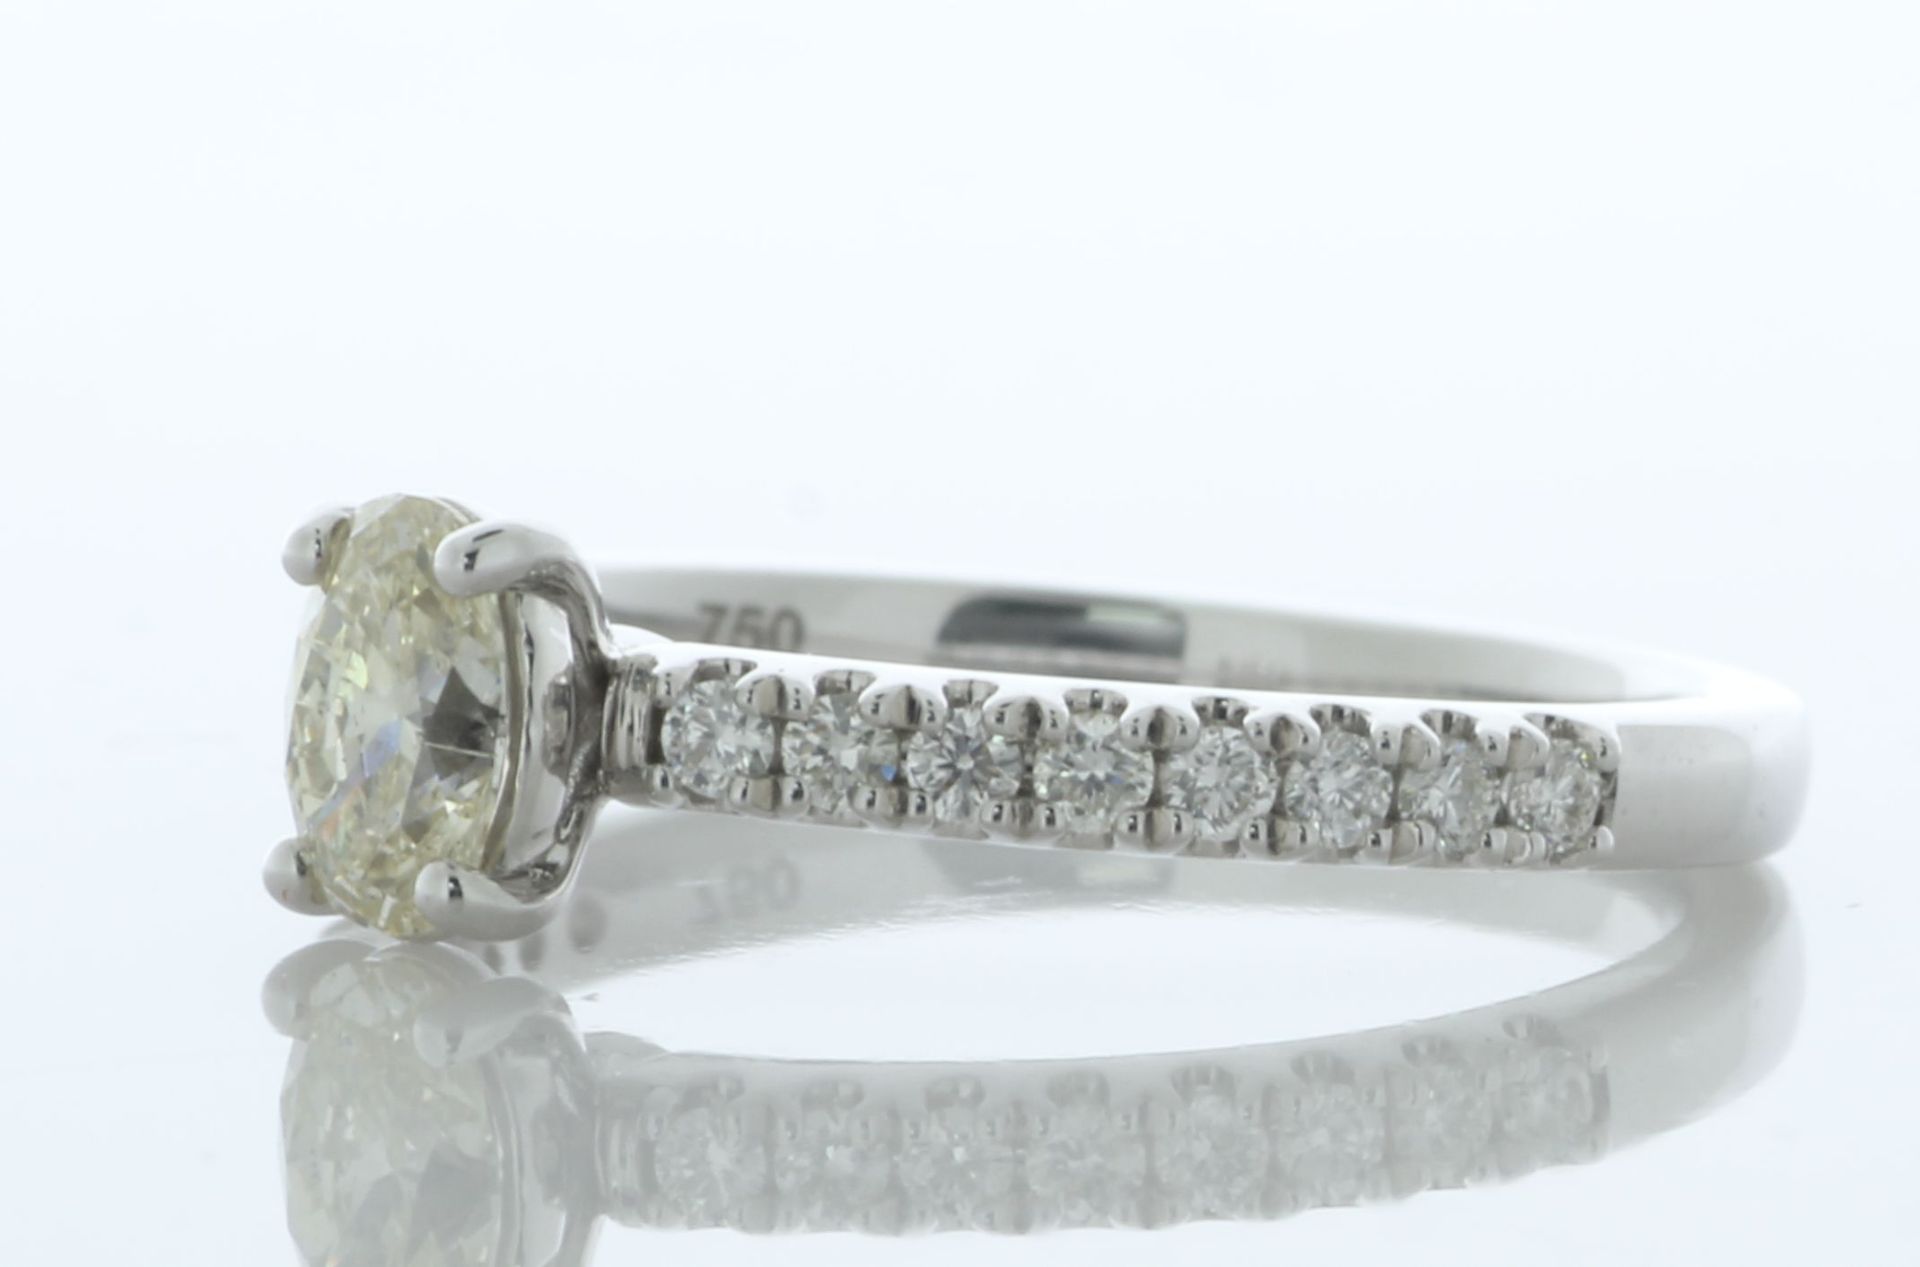 18ct White Gold Single Stone Oval Cut Diamond Ring (0.42) 0.67 Carats - Valued By IDI £7,870.00 - - Image 2 of 6